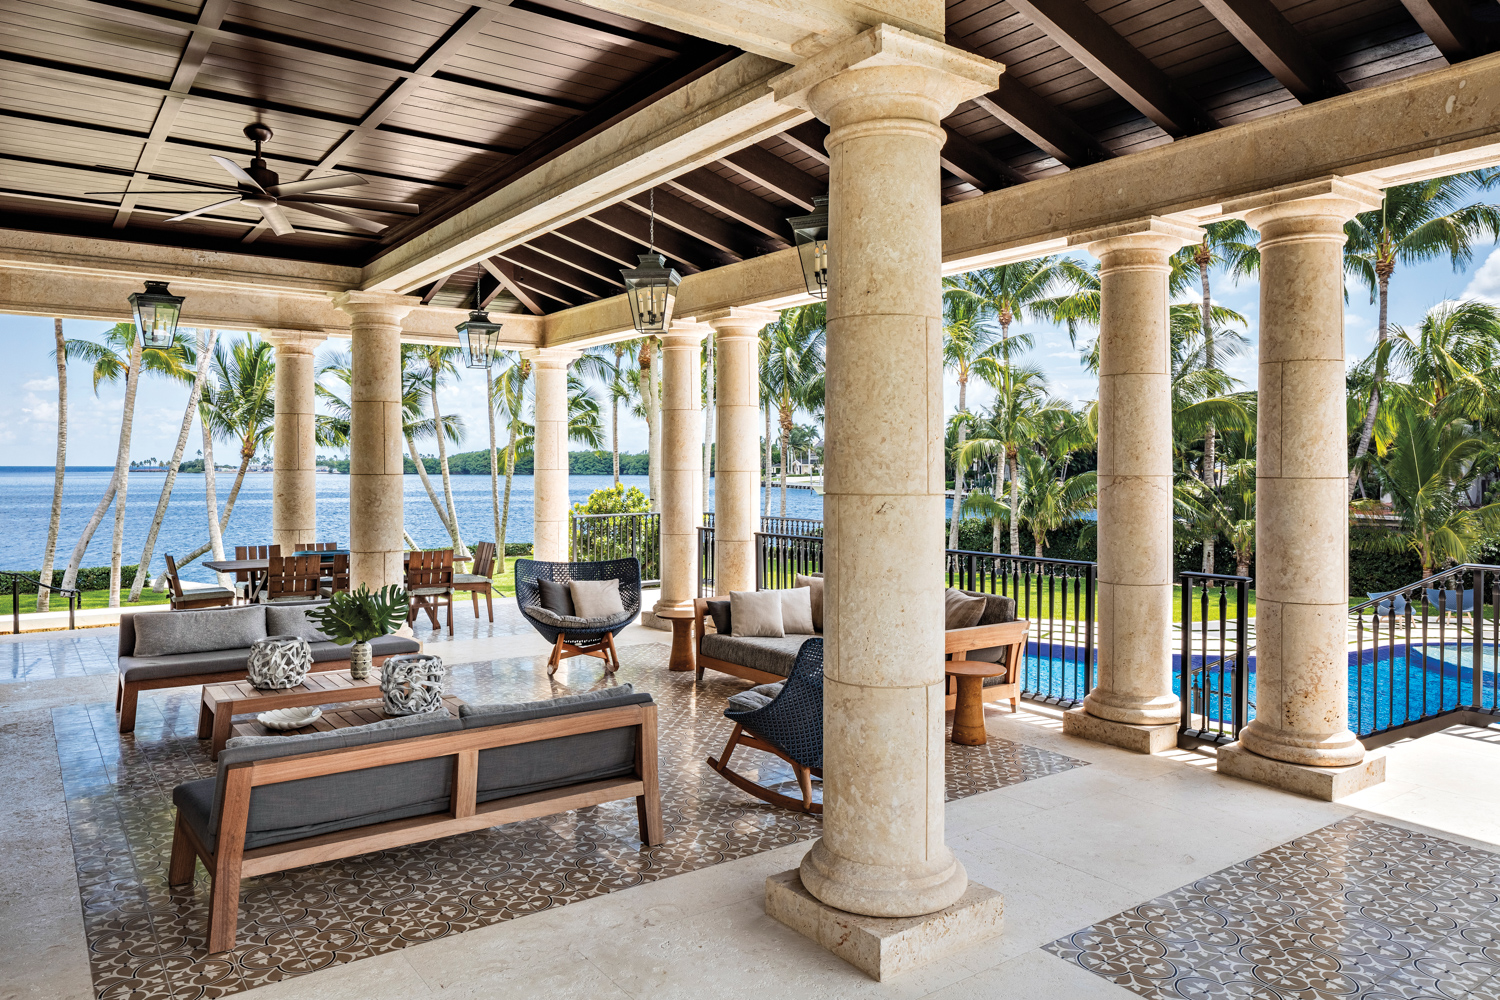 covered balcony with coral stone columns, seating area and dining area overlooking pool and water